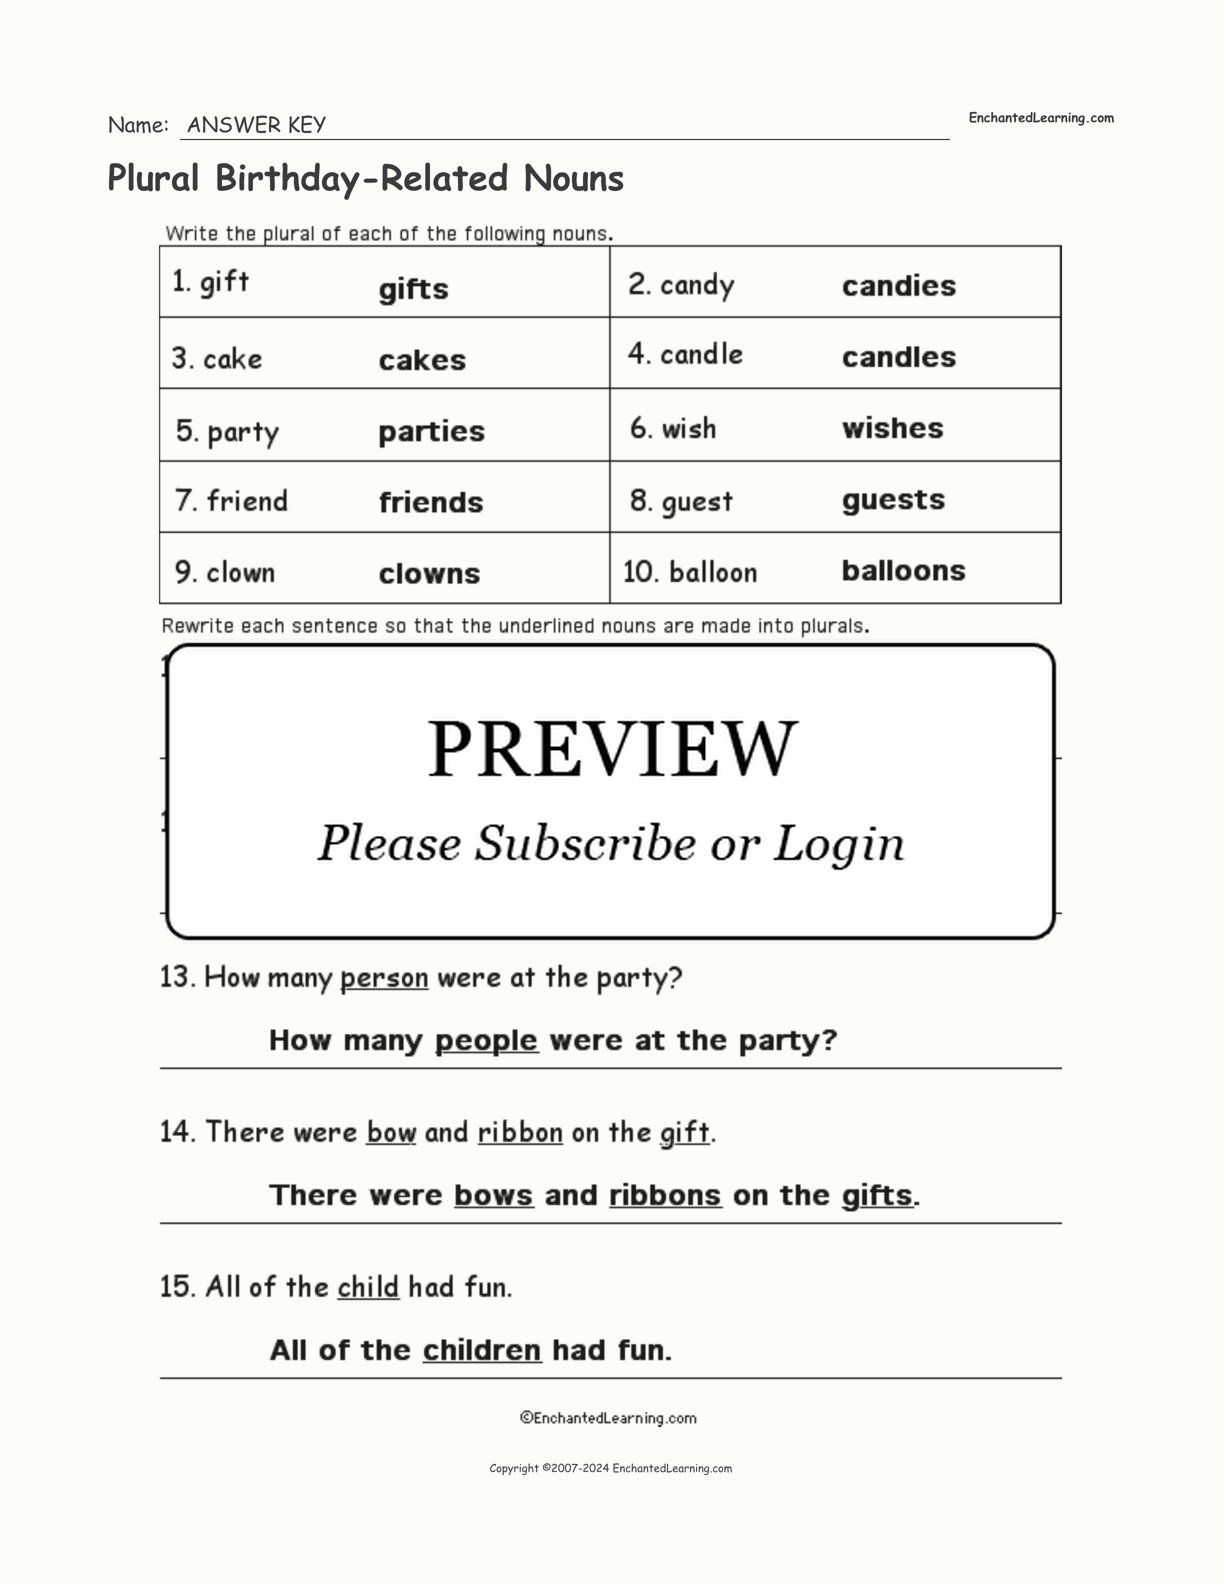 Plural Birthday-Related Nouns interactive worksheet page 2